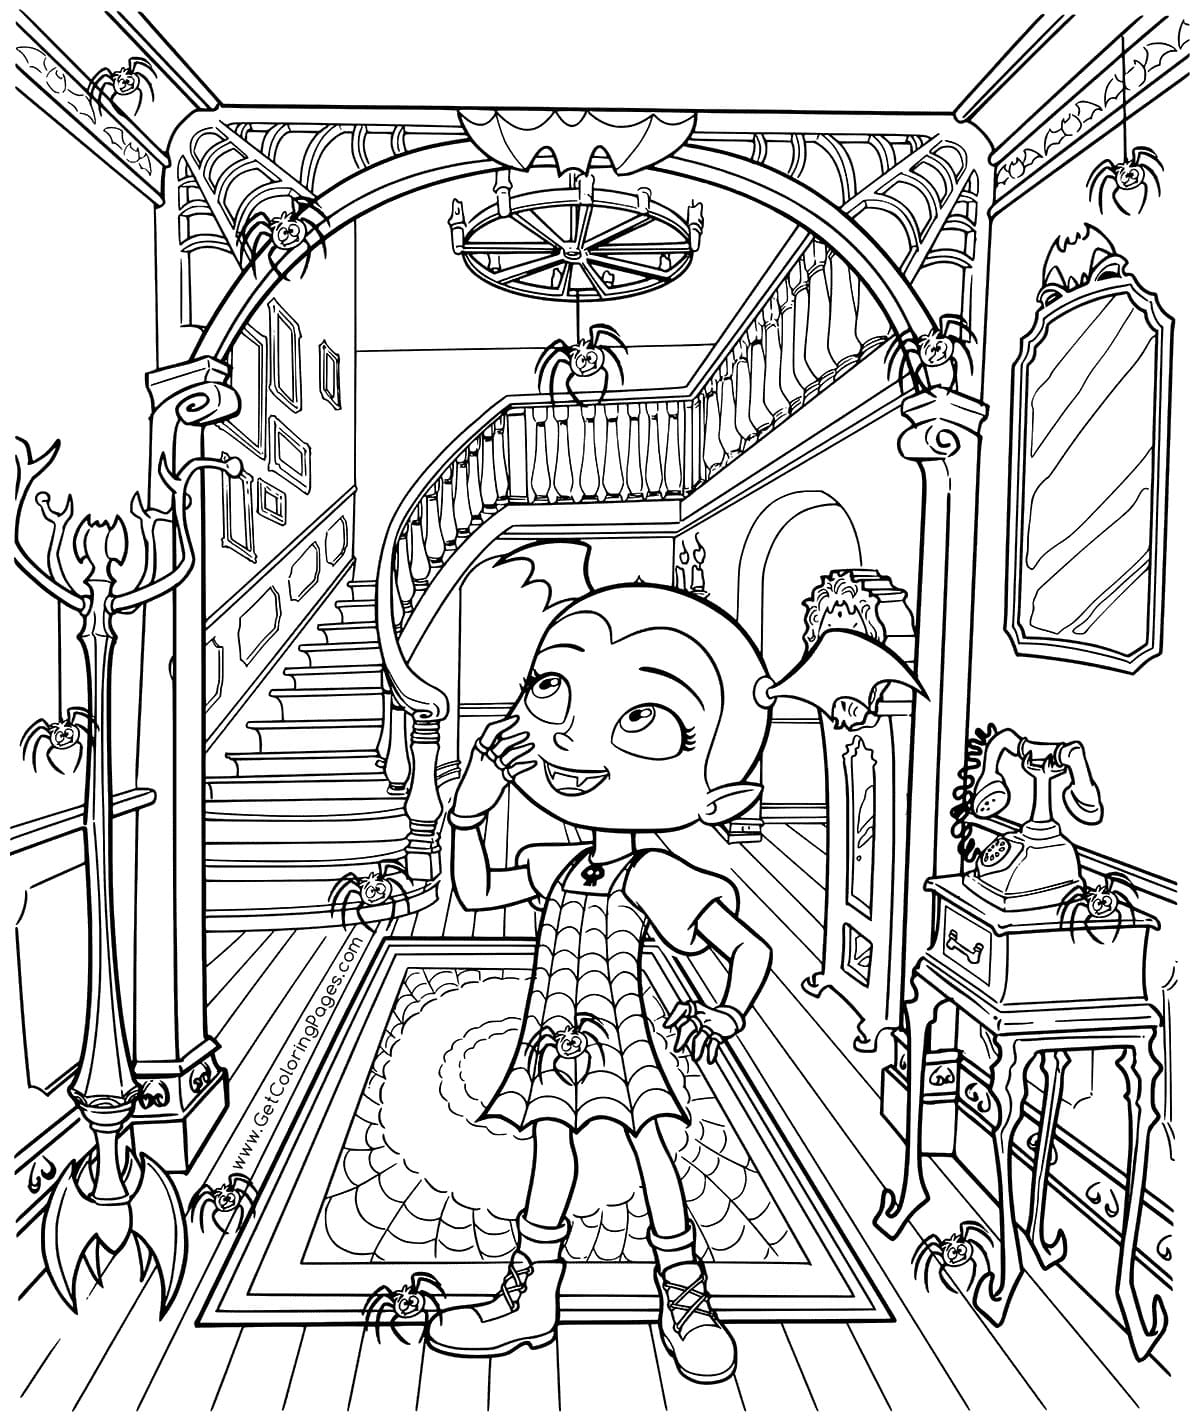 Vampirina Coloring Pages   20 Pictures Free Printable